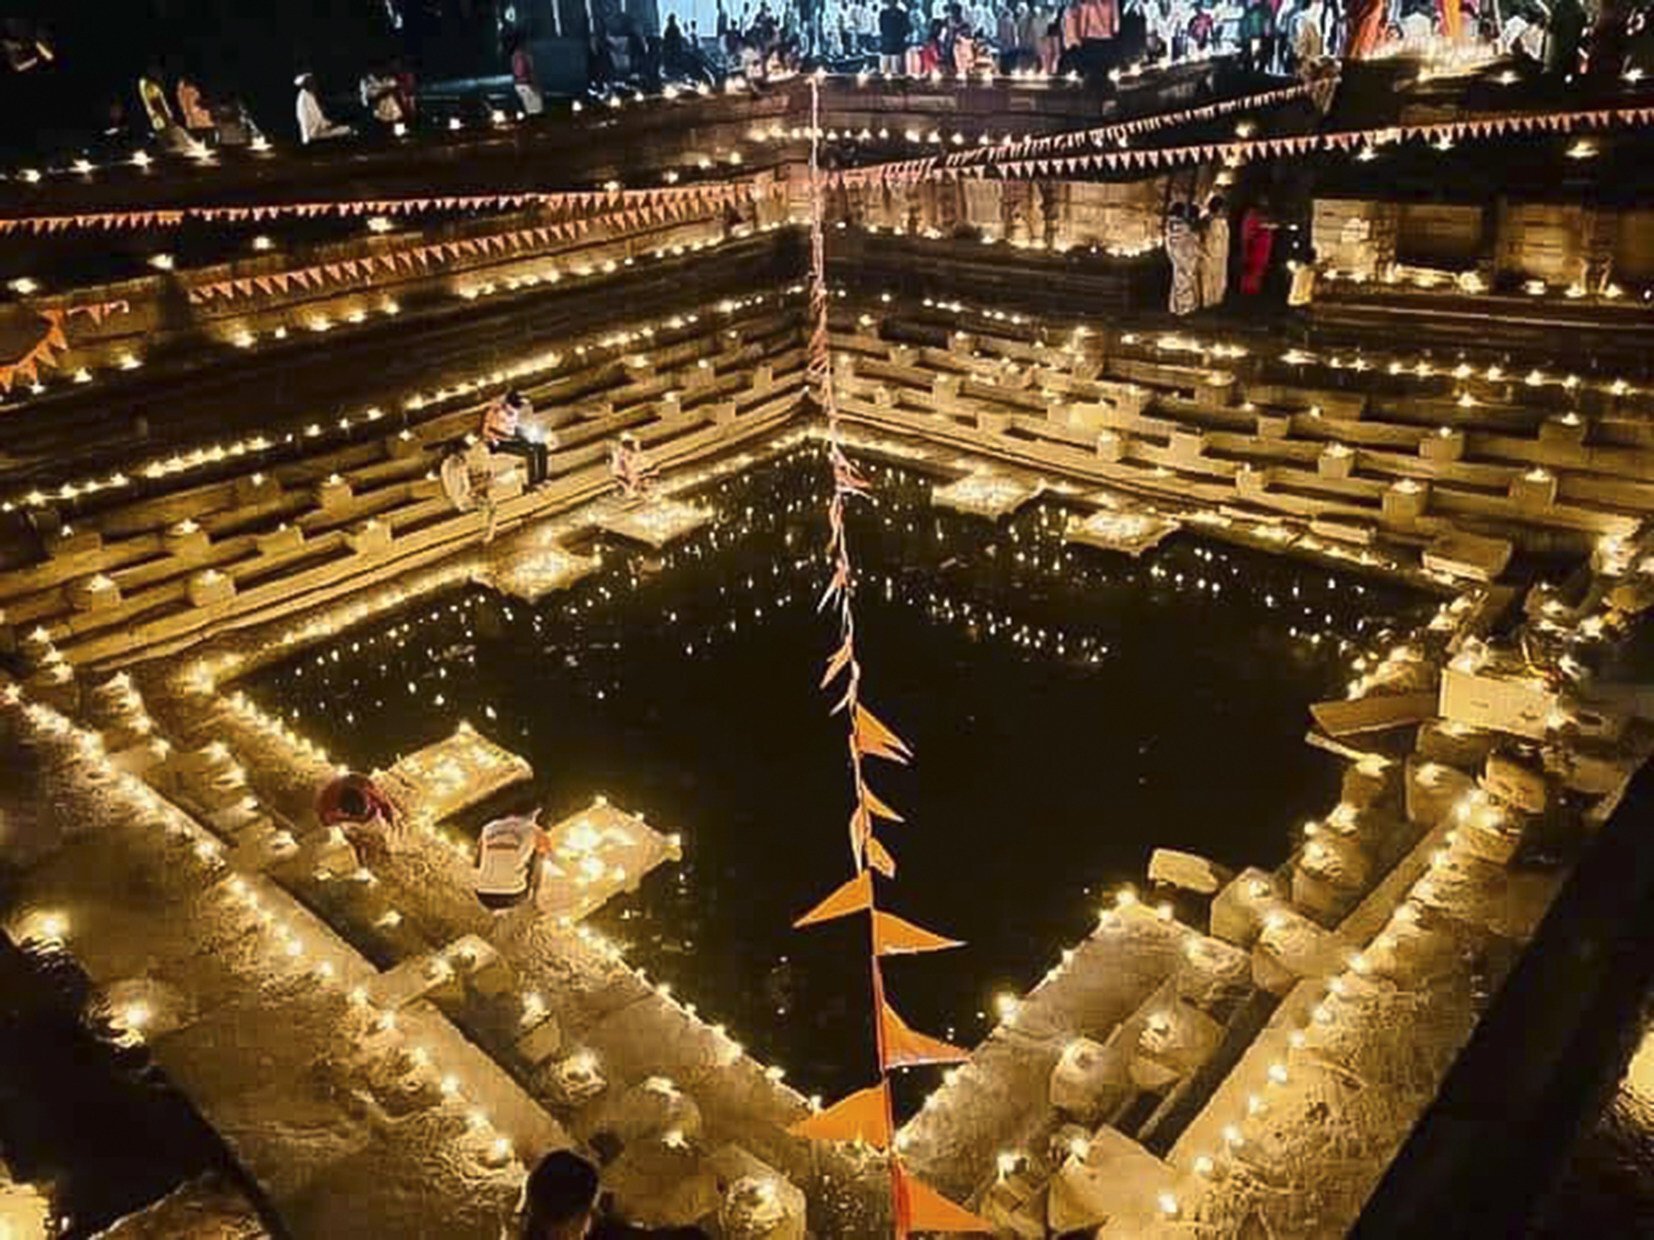 A stepwell in Deulgaon Village, in Ahmednagar District, in India’s  Maharashtra state, lit with diyas, or small earthen lamps, on the annual Hindu festival of Maha Shivaratri.